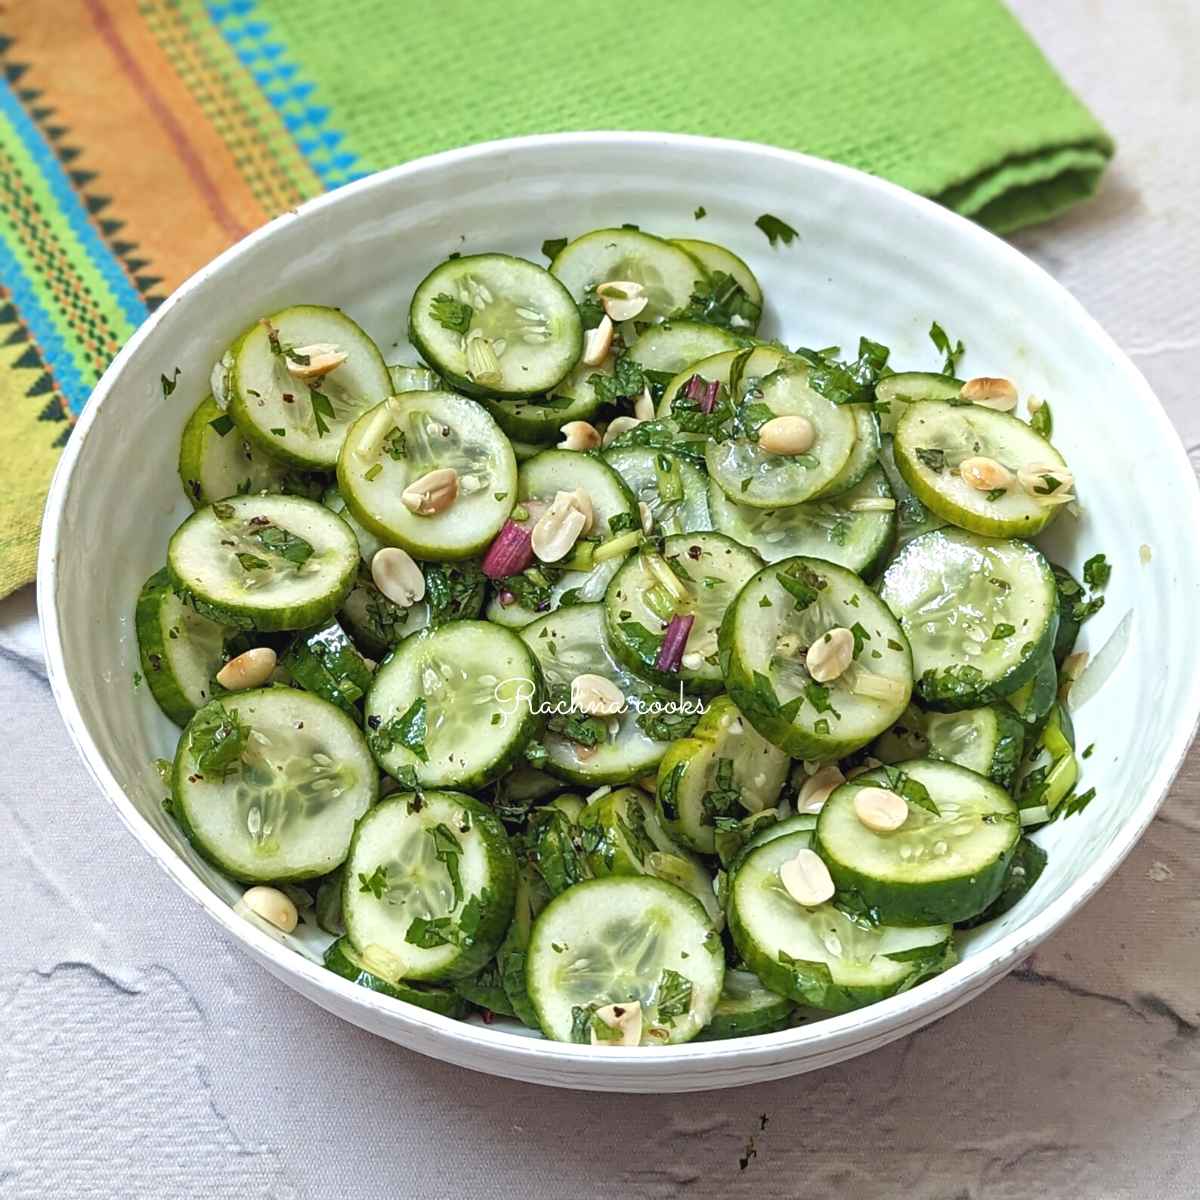 Vietnamese cucumber salad served in a white bowl with a garnish of peanuts.